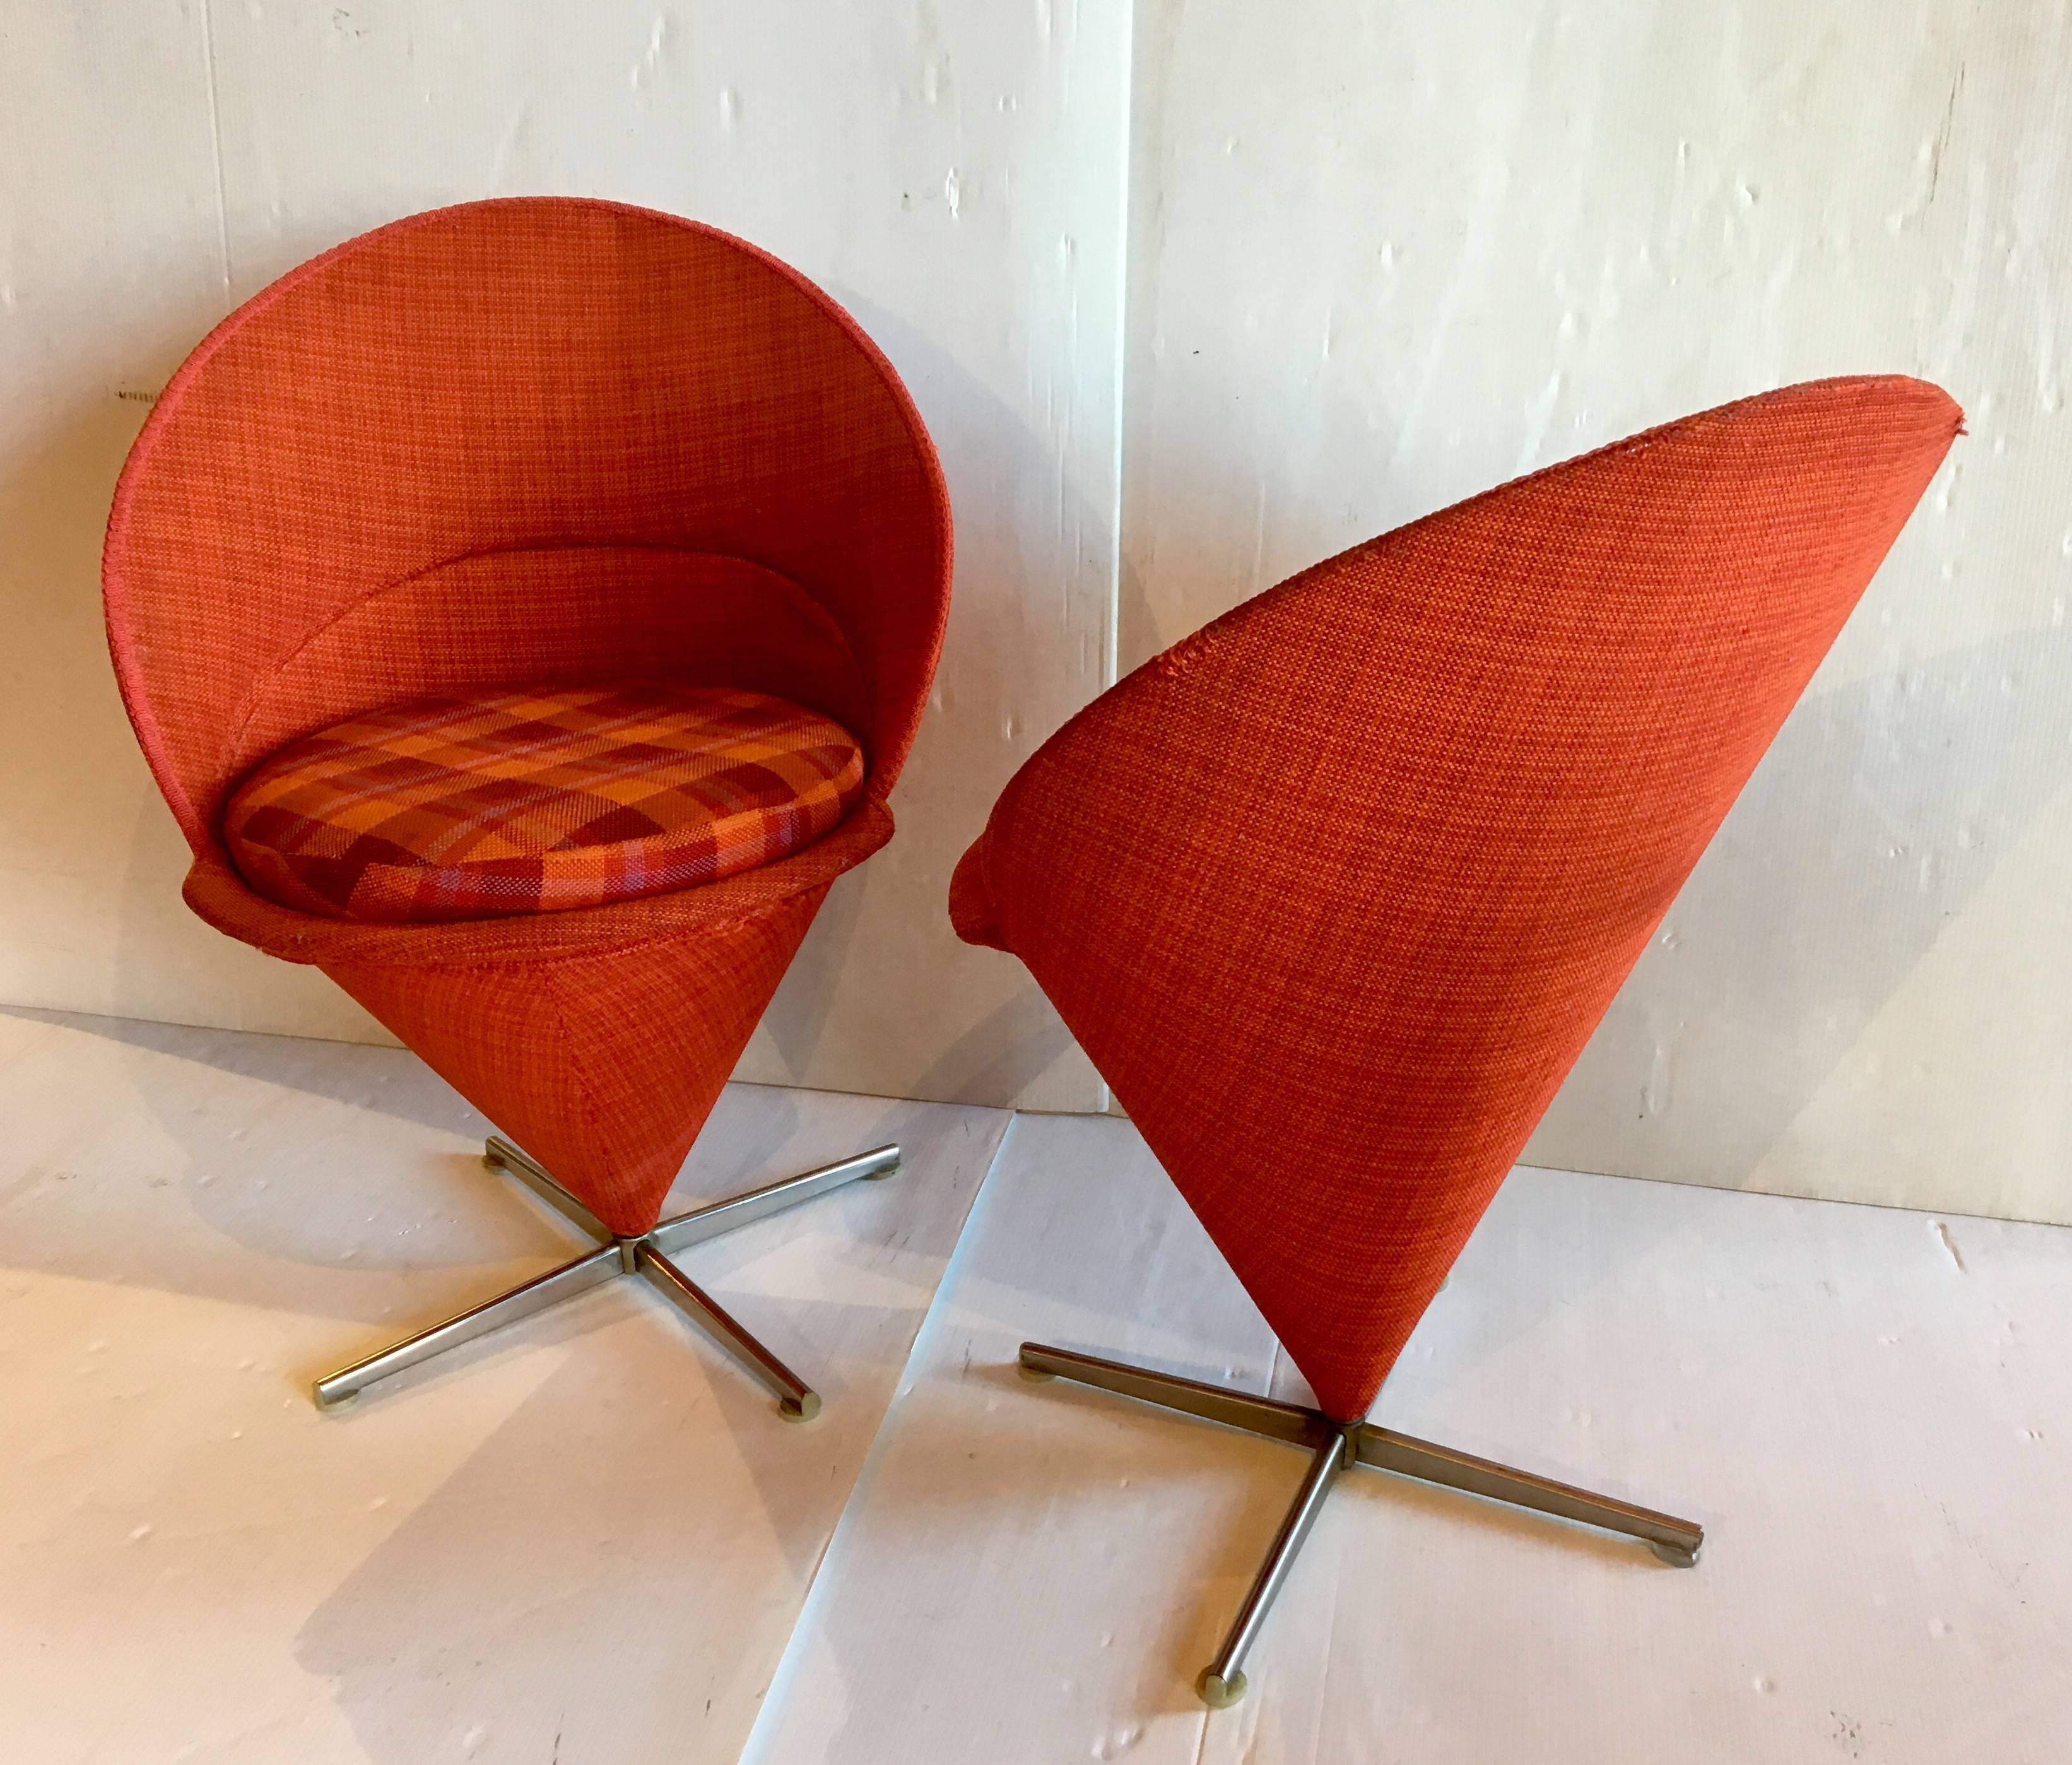 Beautiful pair of red/orange cone chairs by Verner Panton, early production original condition and fabric, polished steel base. designed in 1958 with early Made in Denmark label, the chairs shows some worn and a couple of light stains and some small